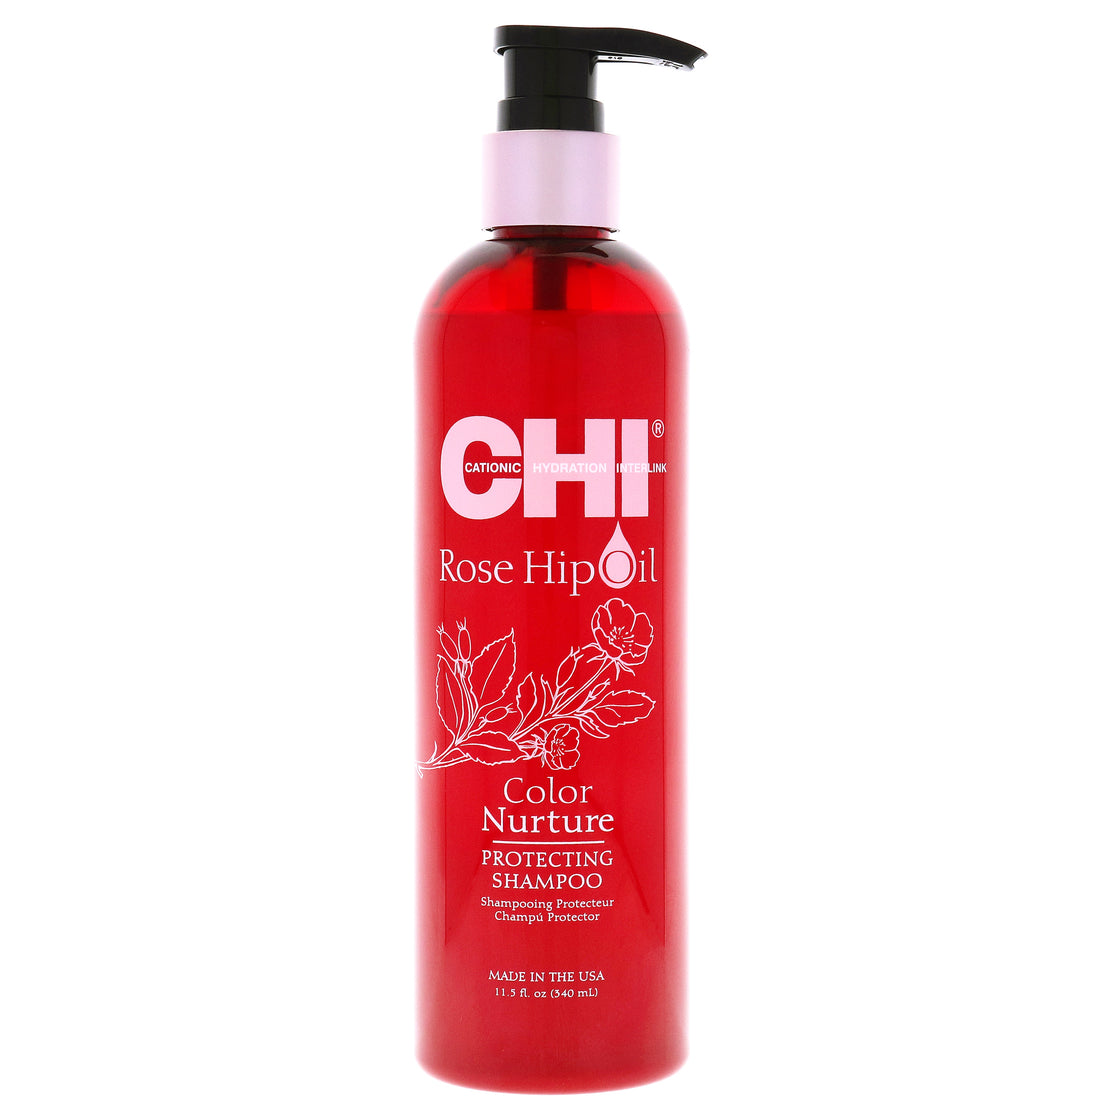 Rose Hip Oil Color Nurture Protecting Shampoo by CHI for Unisex - 11.5 oz Shampoo